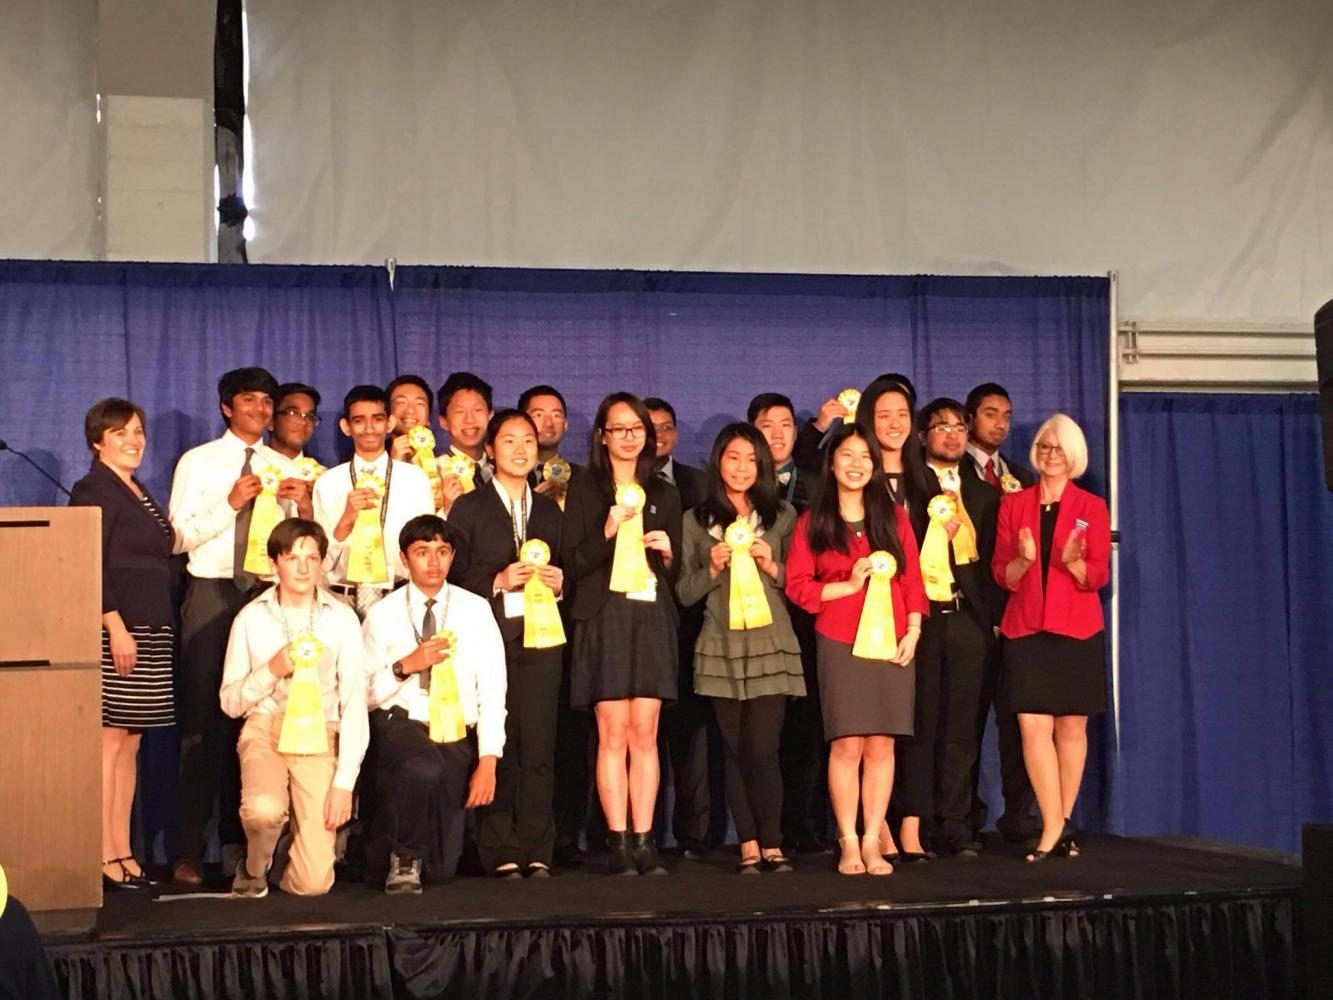 Several Irvington competitors were among the finalists at the Synopsys Science Fair.